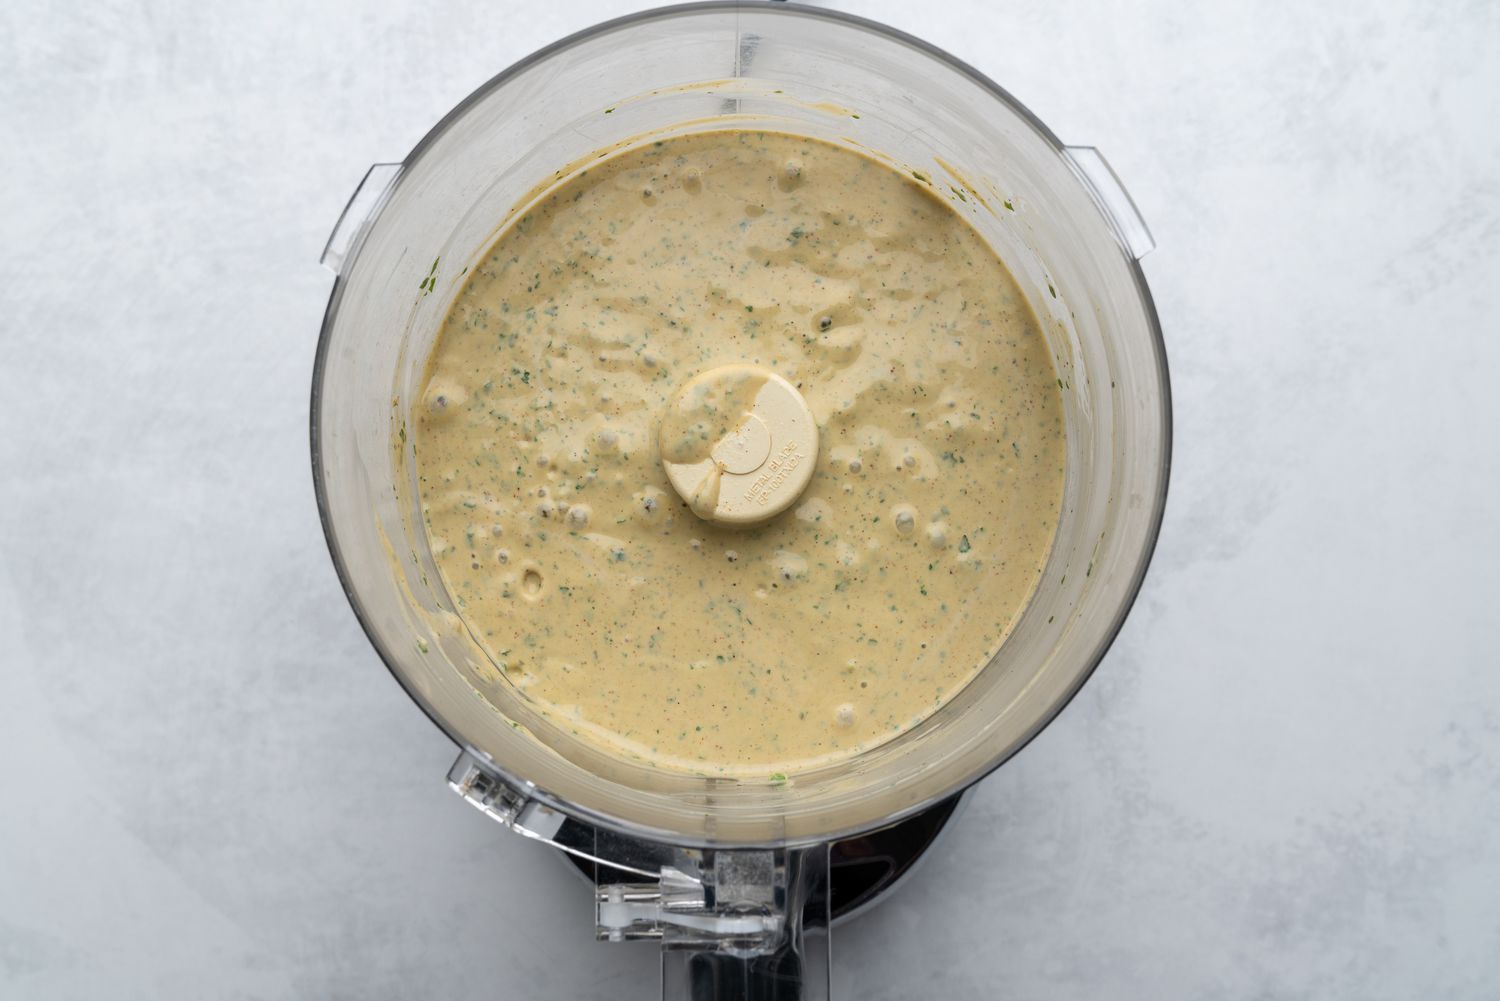 Chick-fil-a Avocado Lime Ranch Dressing in a food processor